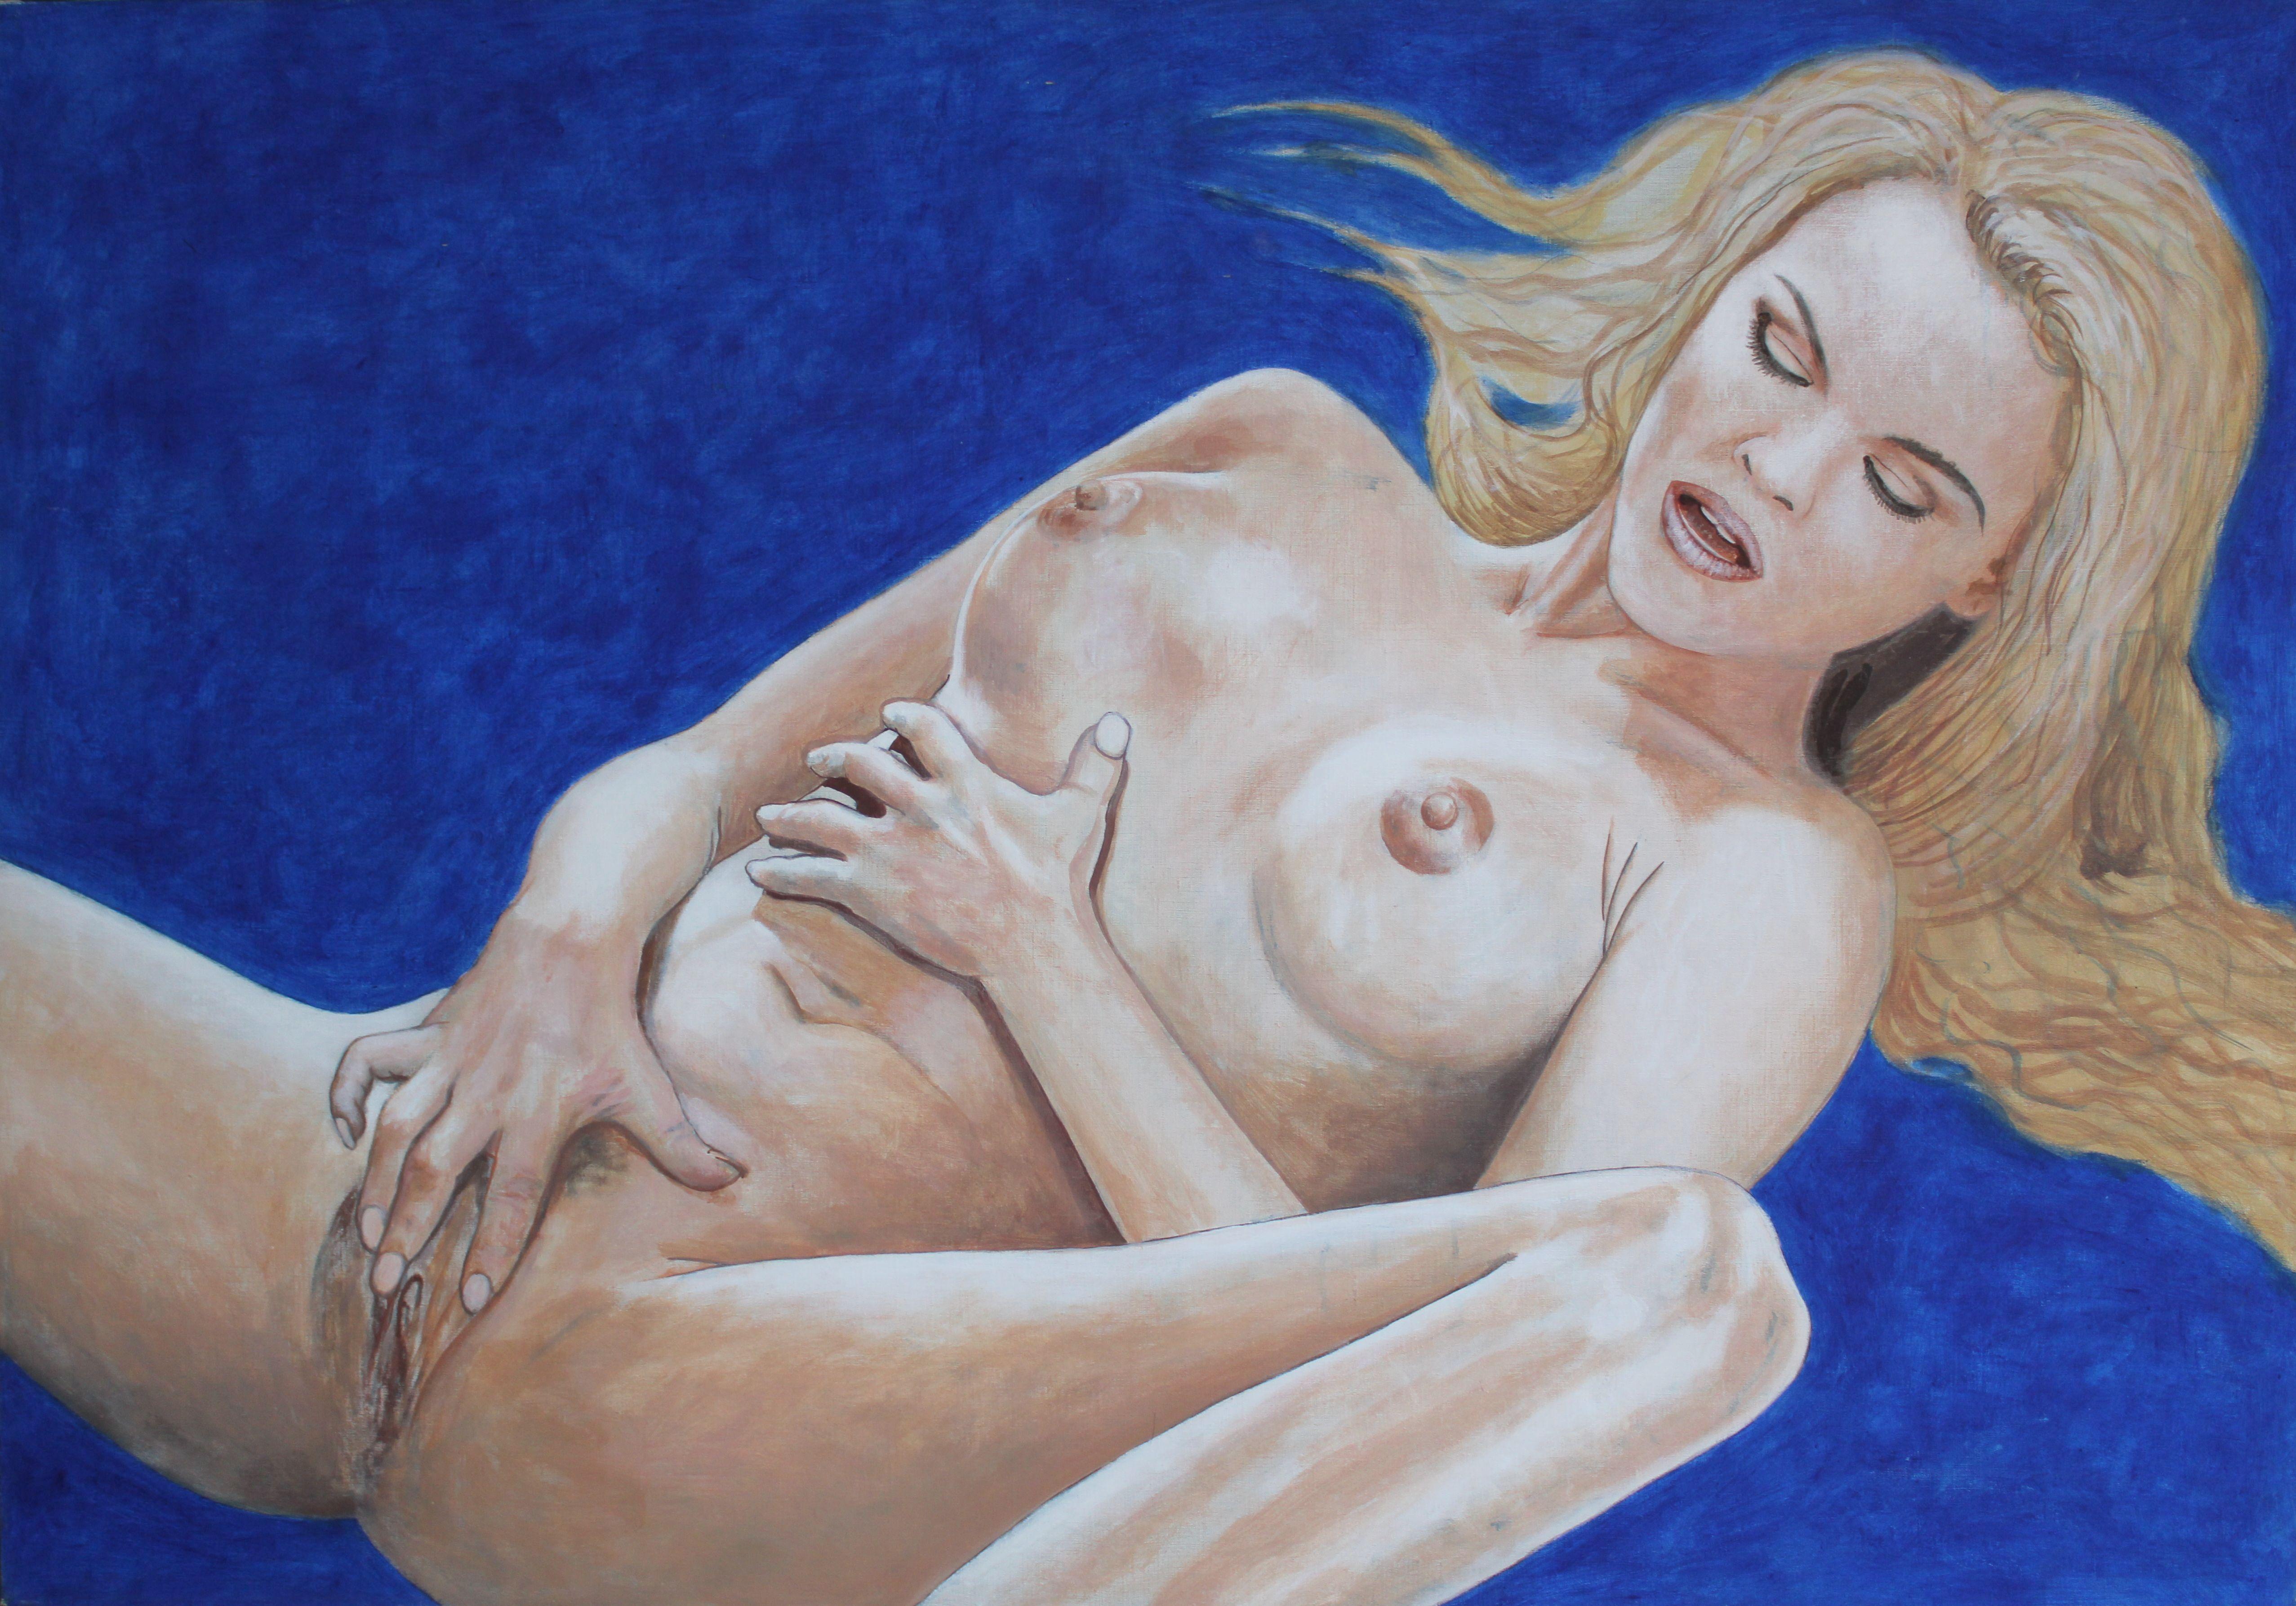 Juris Utans Nude Painting - Woman on a blue background. Erotica. 1993. Oil on canvas. 98x140 cm   